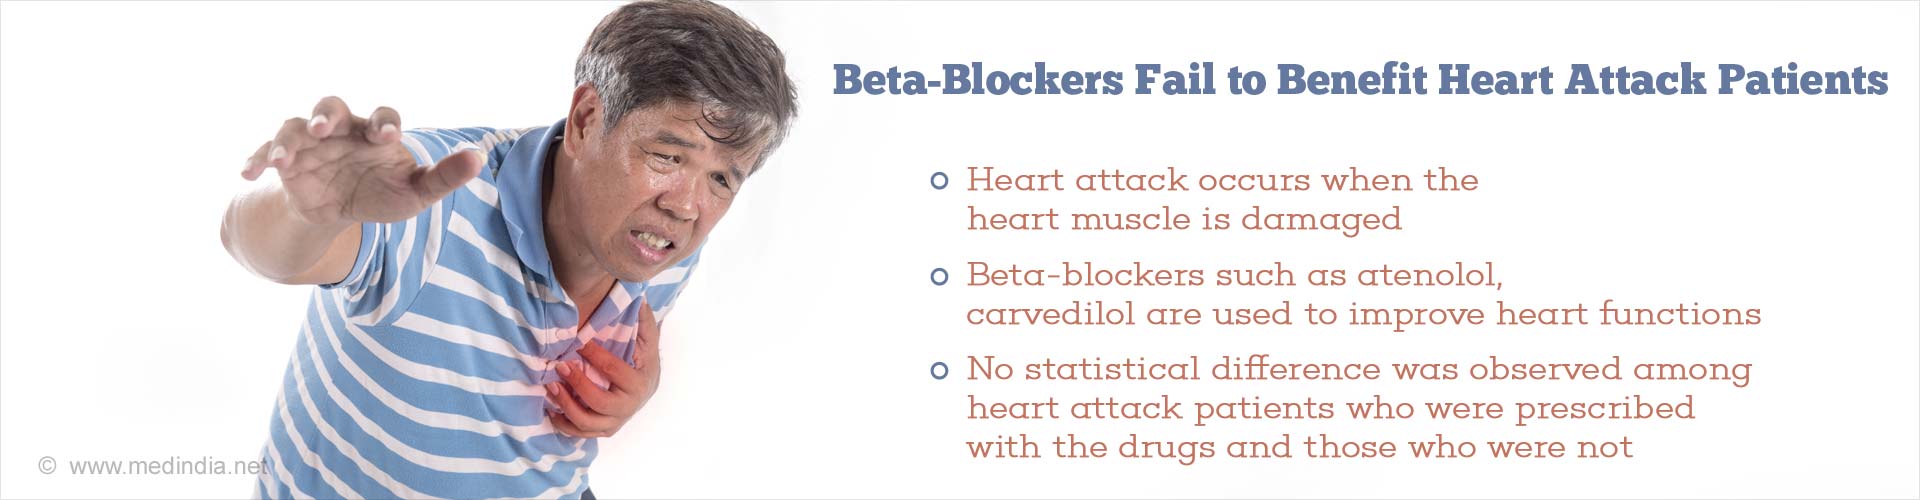 Beta-blockers fail to benefit heart patients
- Heart attack occurs when the heart muscle is damaged
- Beta-blockers such as atenol, carvedilol are used to improve heart functions
- No statistical difference was observed among heart attack patients who were prescribed with the drugs and those who were not